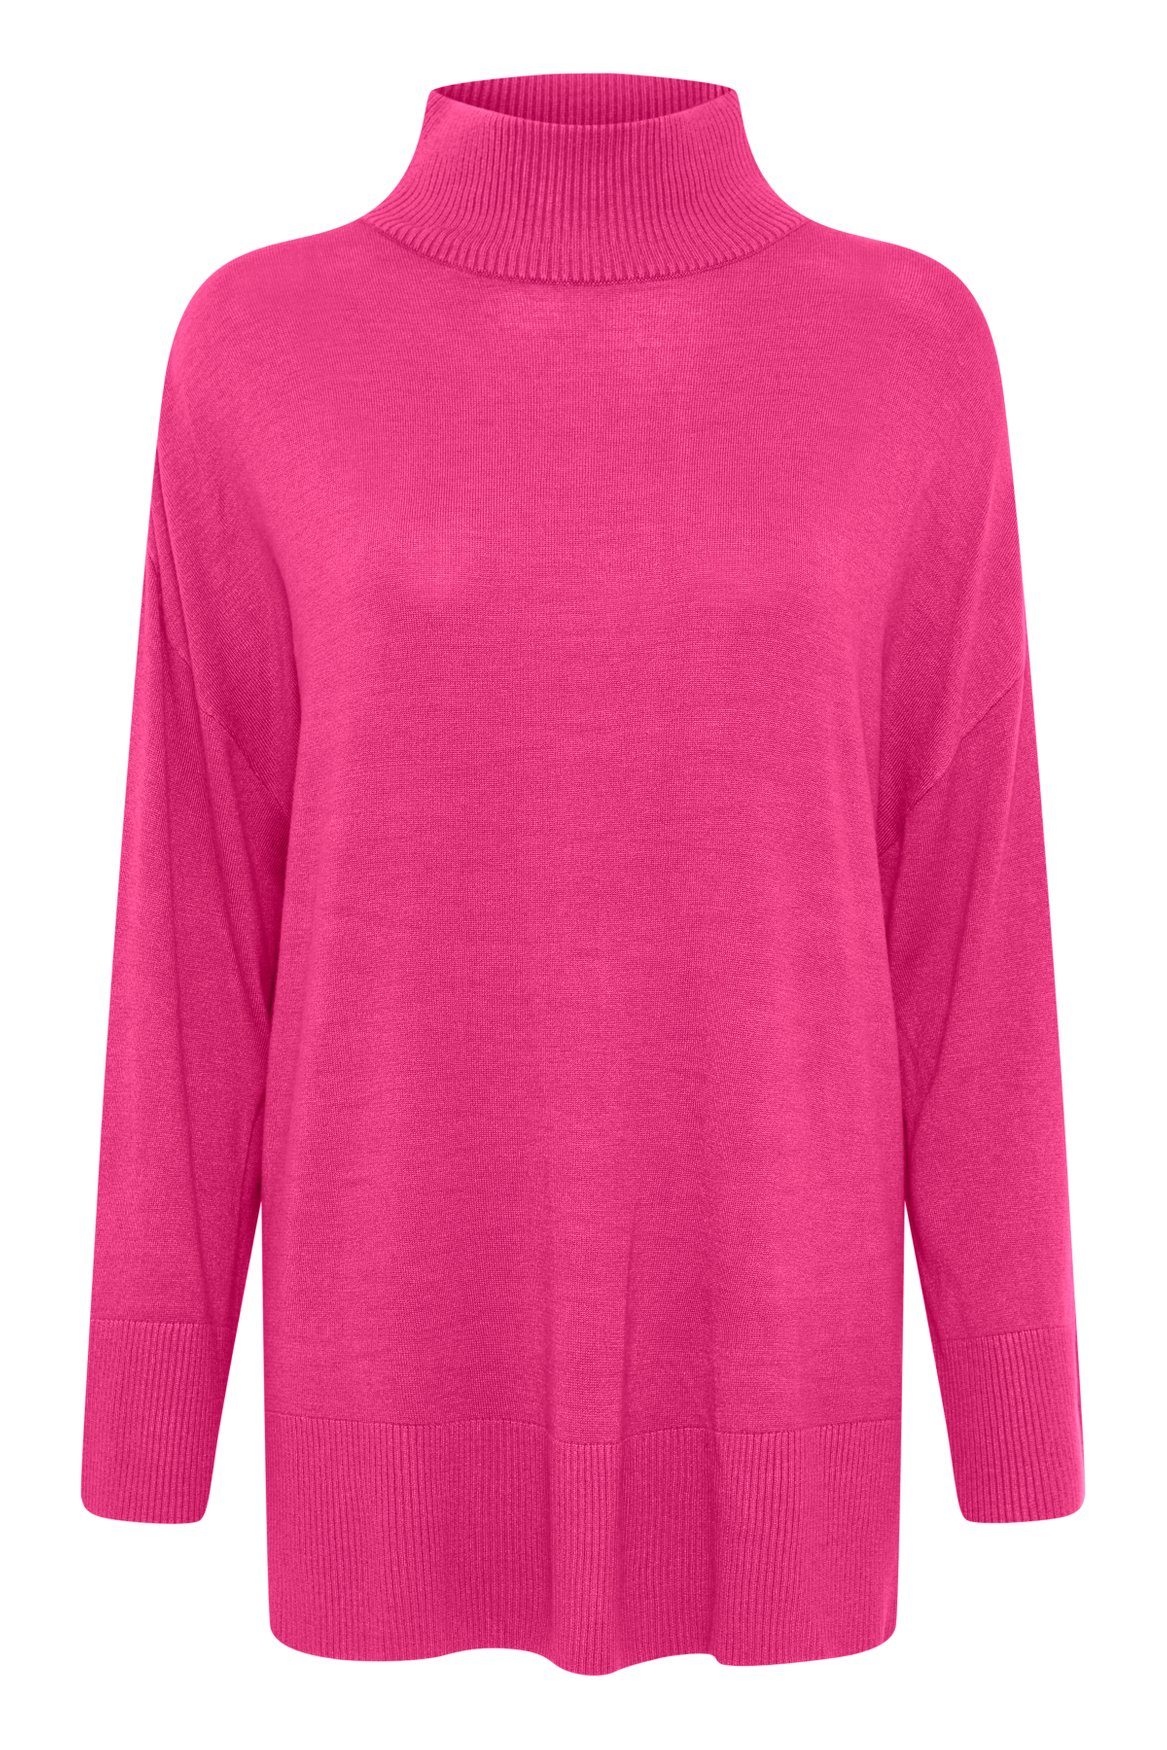 Shirt 6263 Feinstrick Pullover b.young Strickpullover BYMMPIMBA1 in Pink Langarm